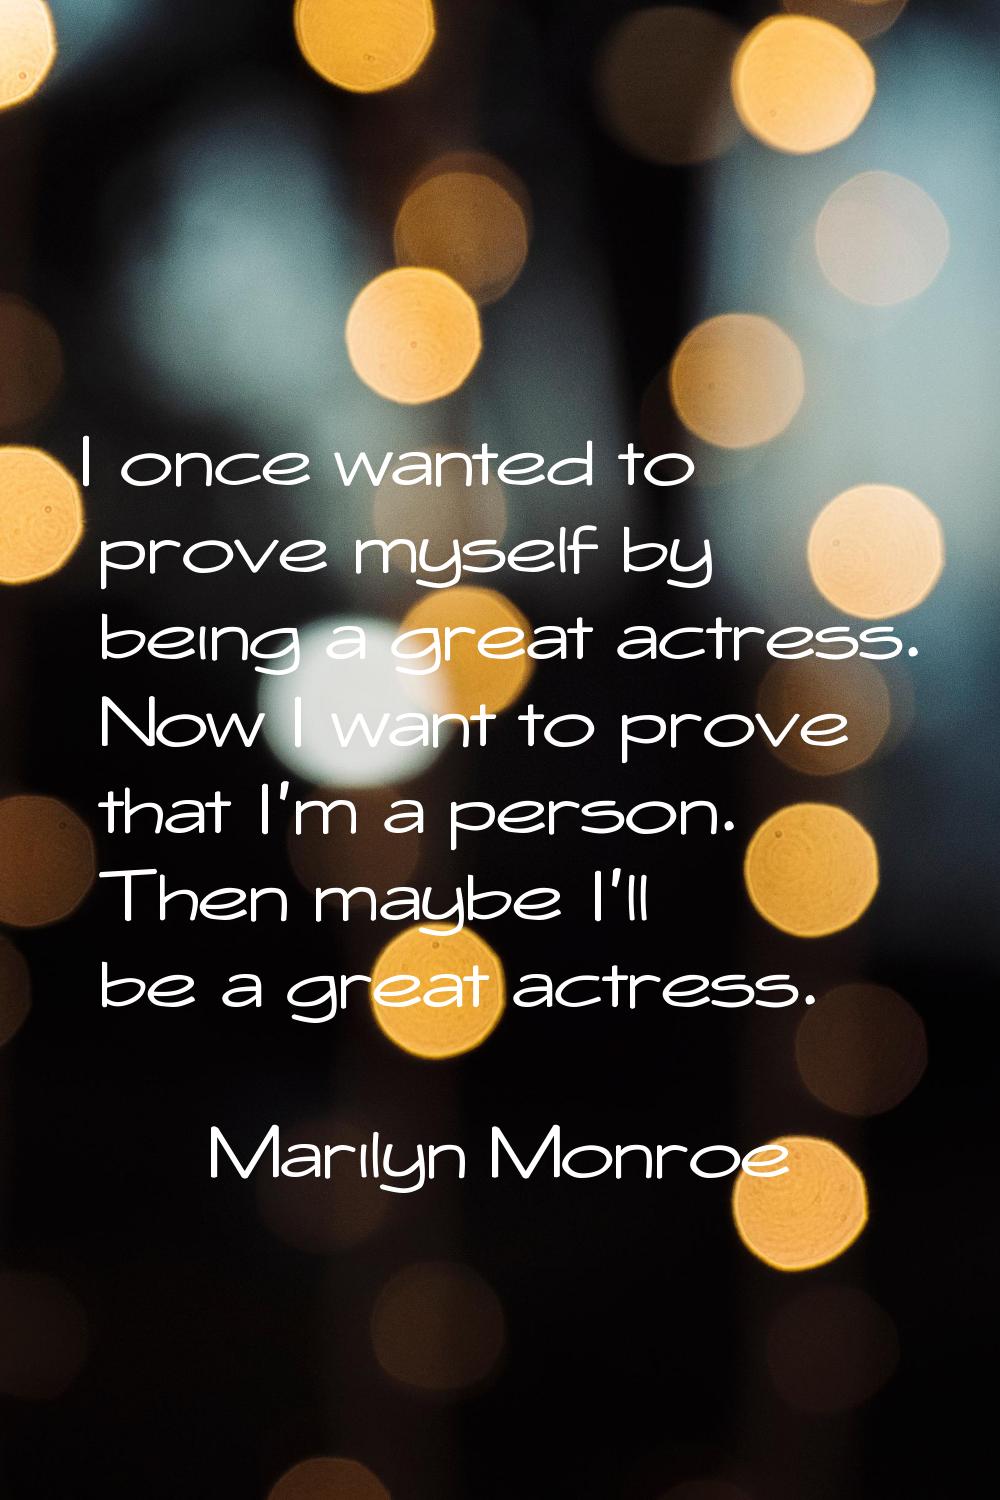 I once wanted to prove myself by being a great actress. Now I want to prove that I'm a person. Then